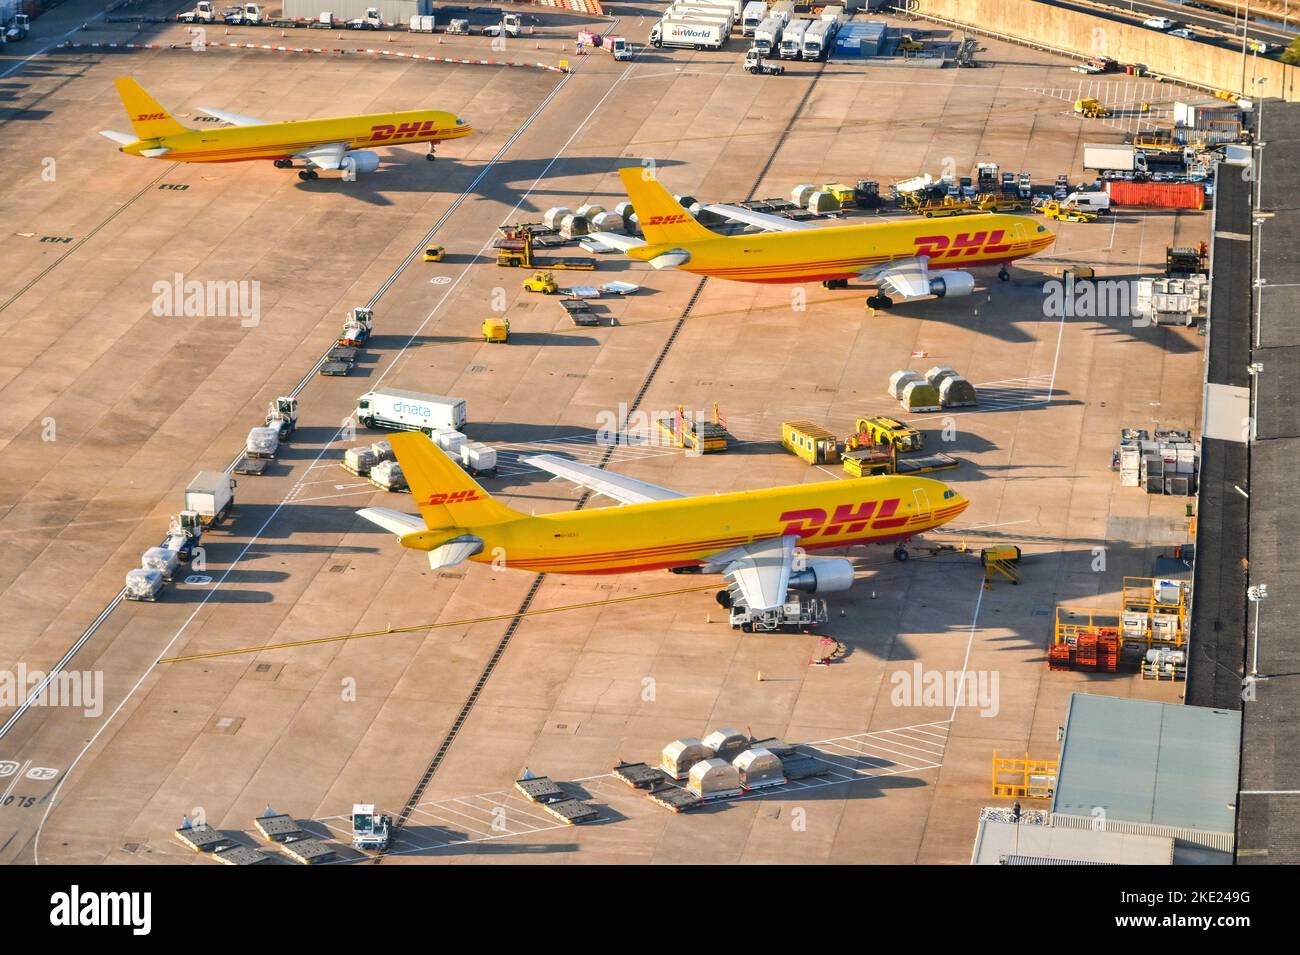 London, England - August 2022: Aerial view of cargo planes operated by DHL parked for unloading at the cargo terminal of an airport. Stock Photo